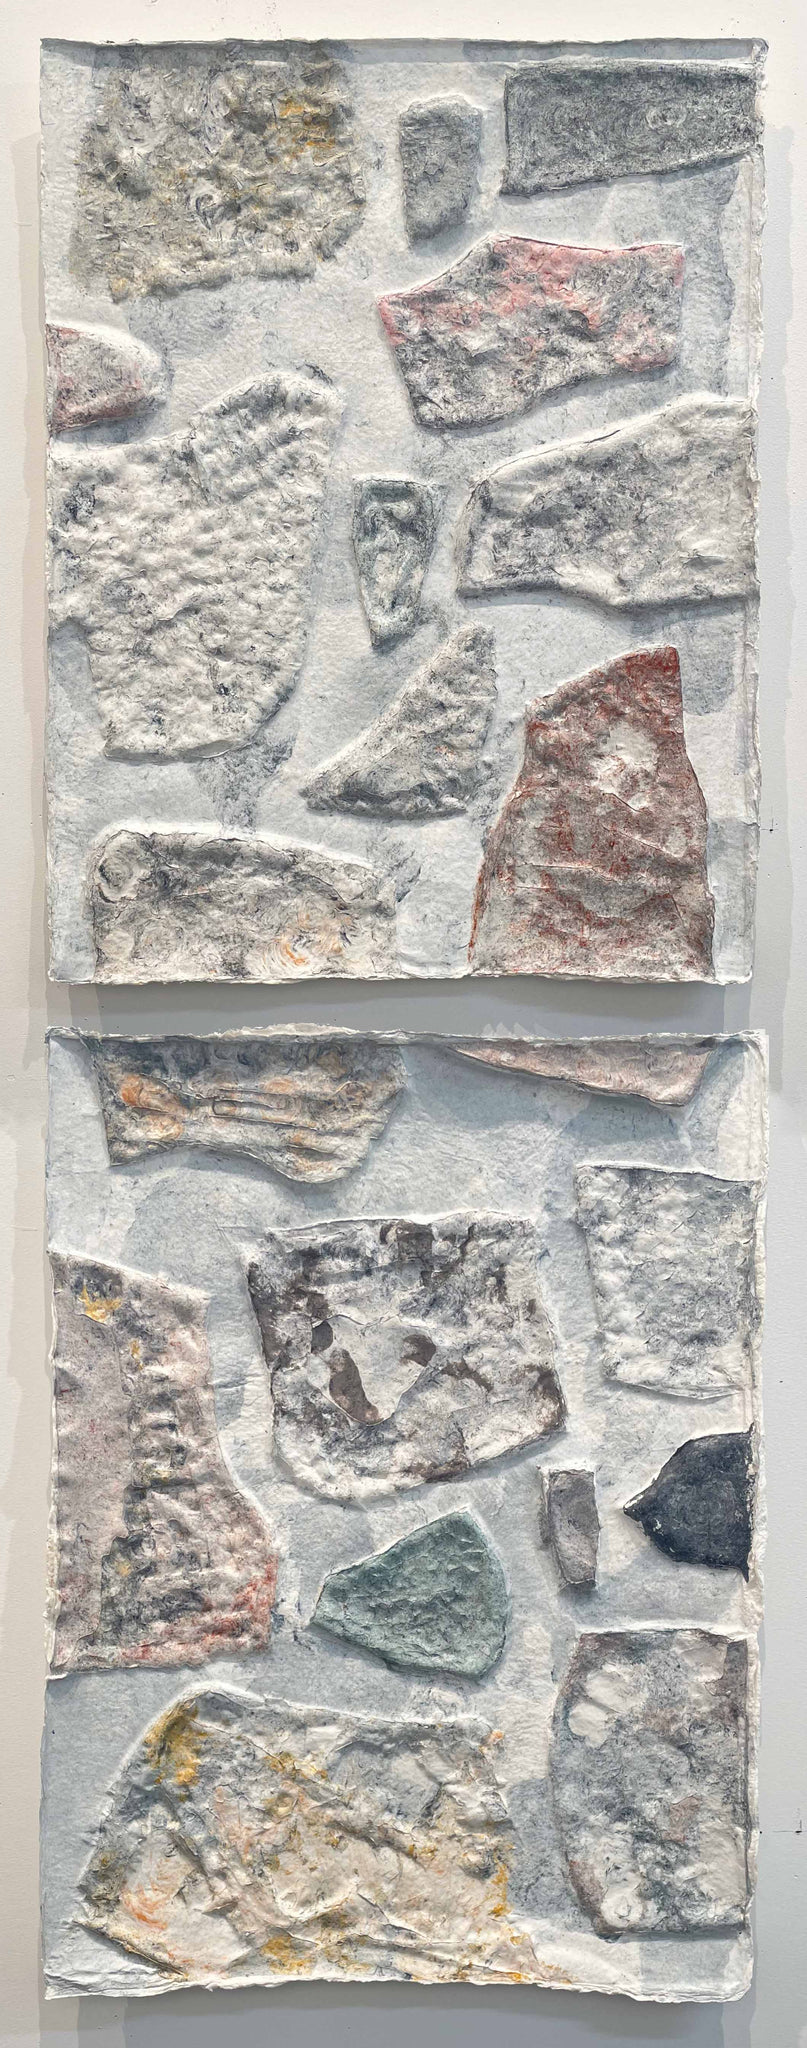 Stone Simulation Vertical Stack (1-2), 2015